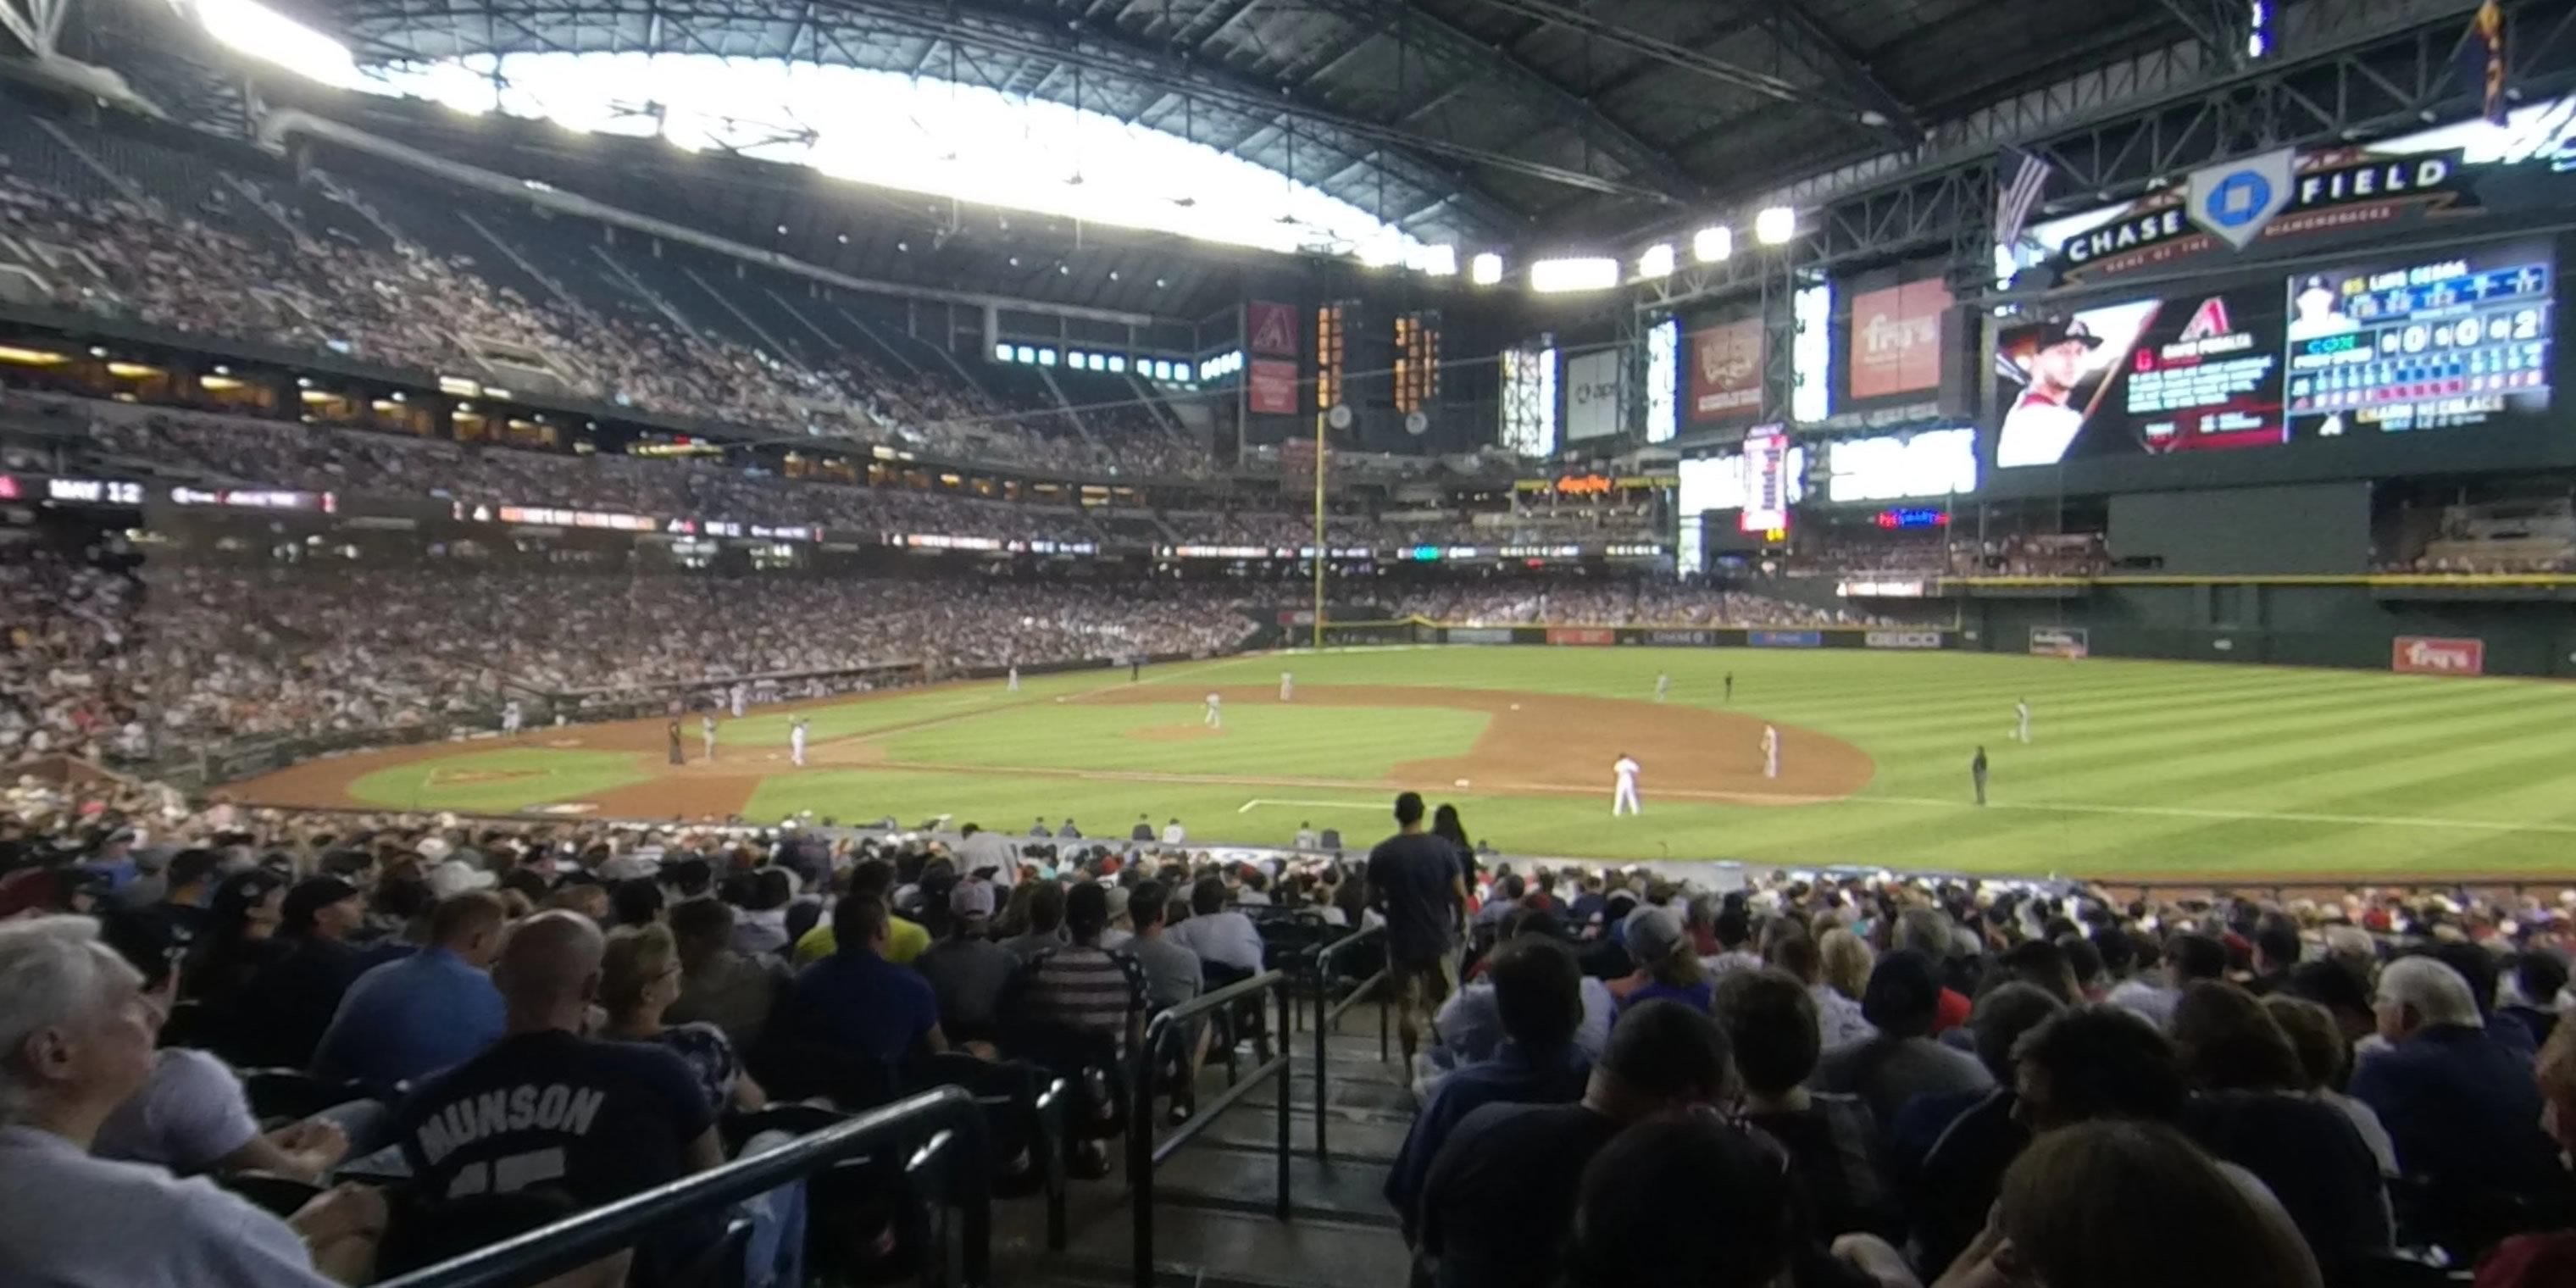 section 115 panoramic seat view  for baseball - chase field